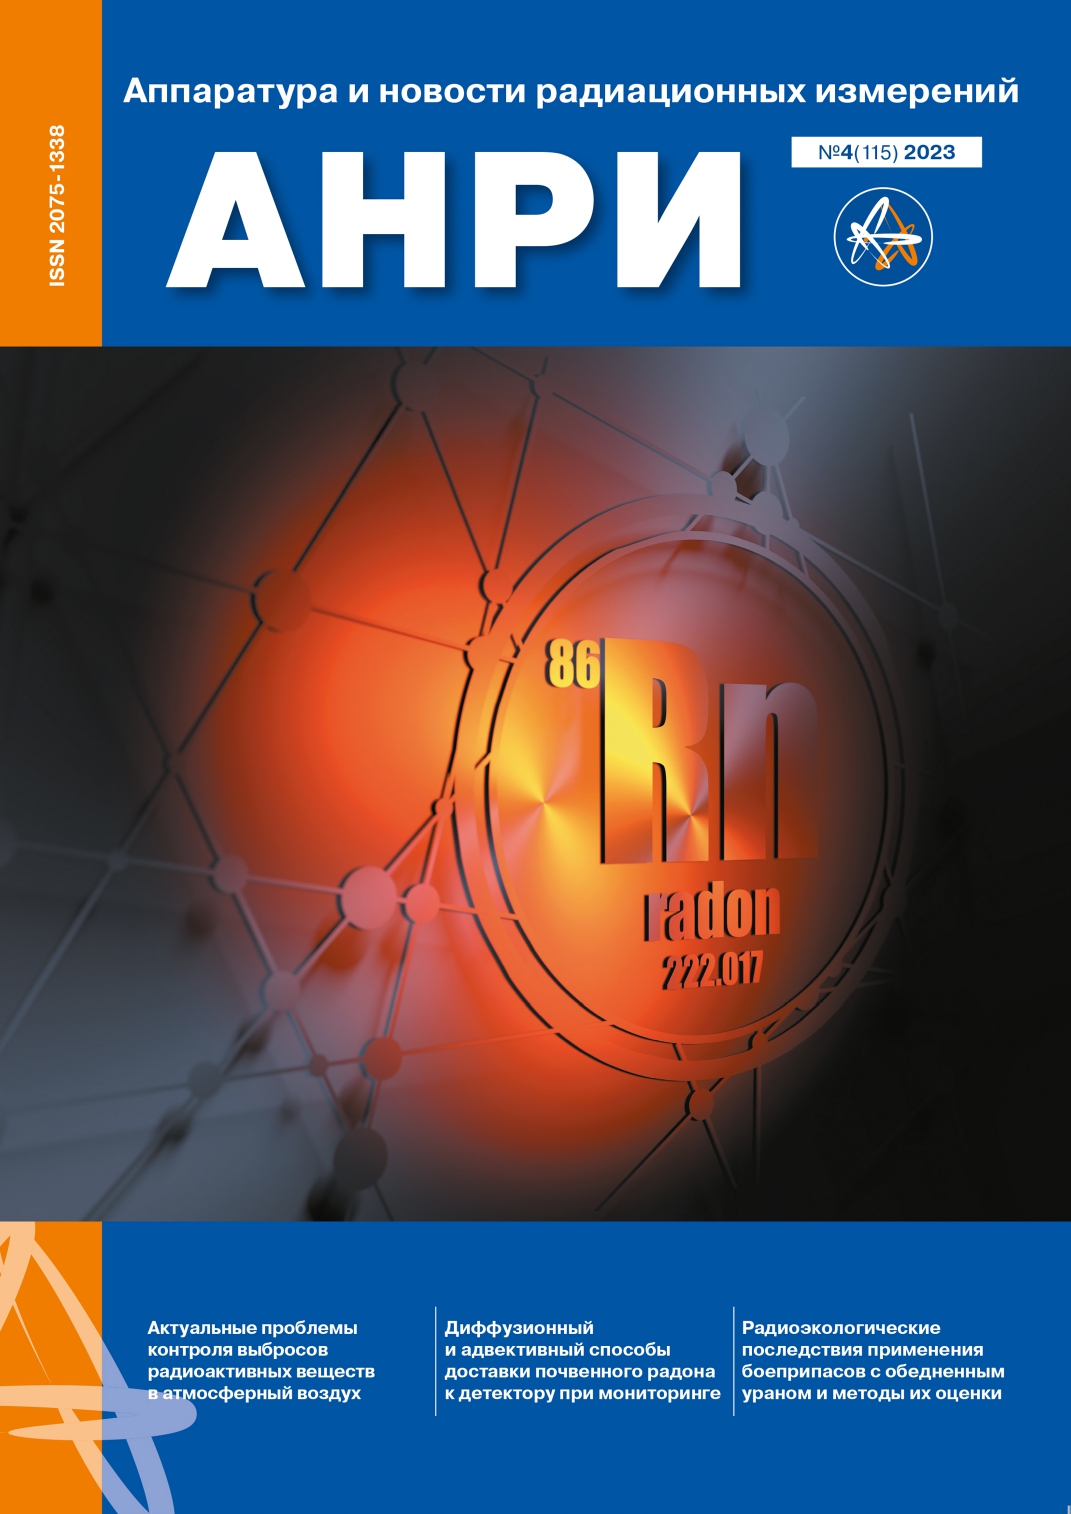                         Evaluation of the Characteristics of Photon Radiation Fields of Medical Linear Electron Accelerators of Different Manufacturers
            